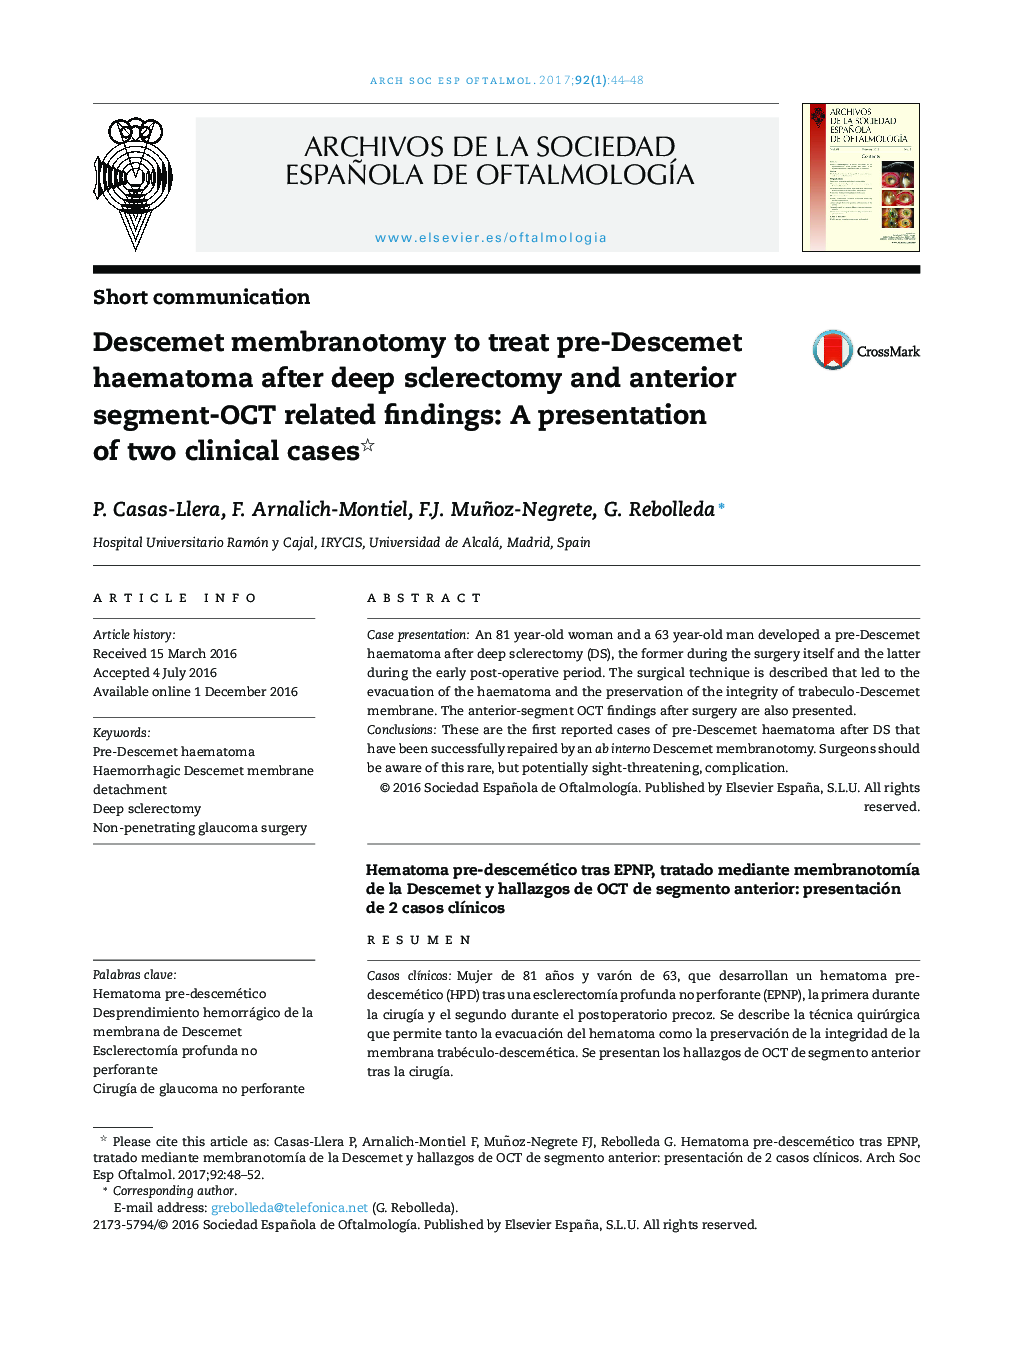 Descemet membranotomy to treat pre-Descemet haematoma after deep sclerectomy and anterior segment-OCT related findings: A presentation of two clinical cases